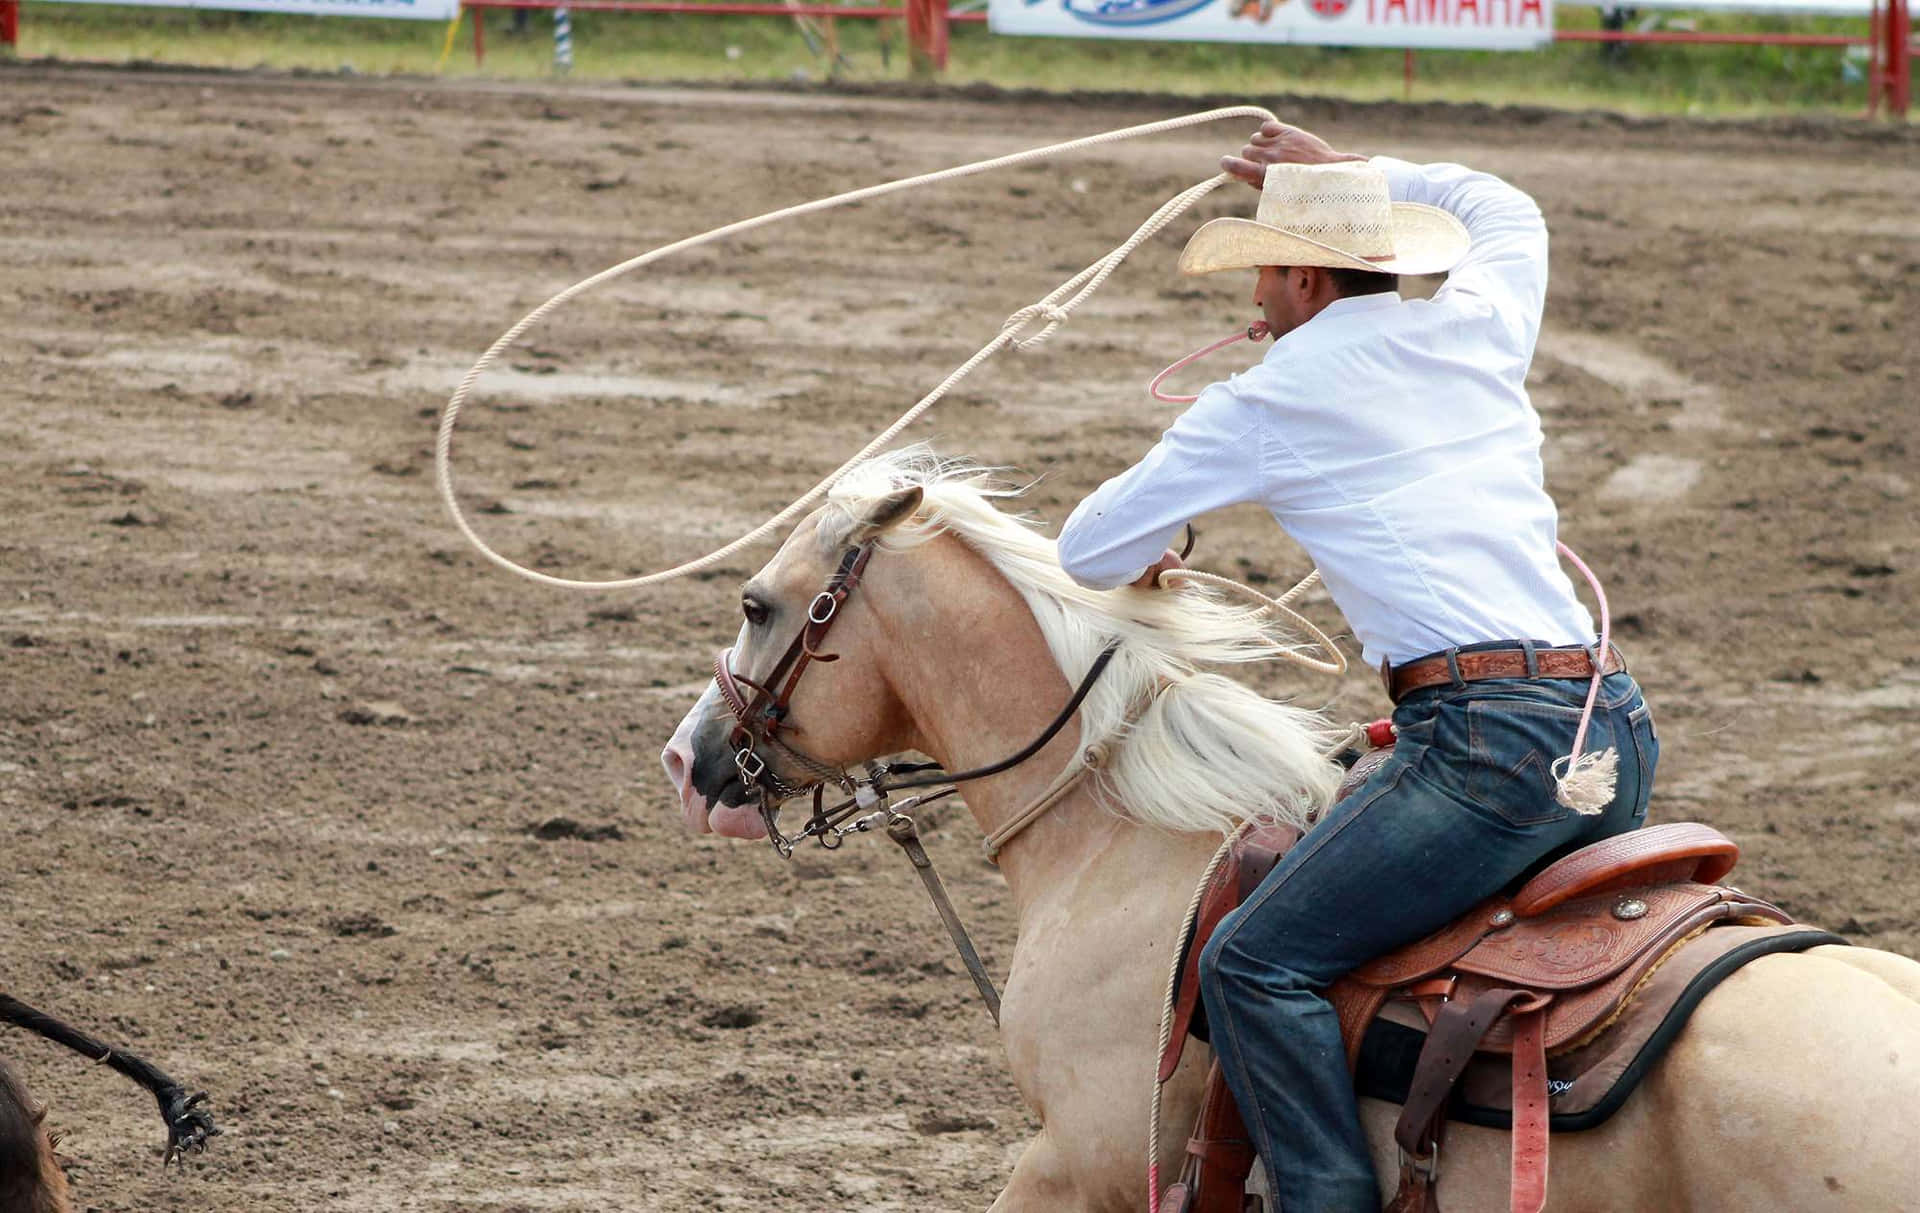 Feel the thrill of the rodeo! Wallpaper